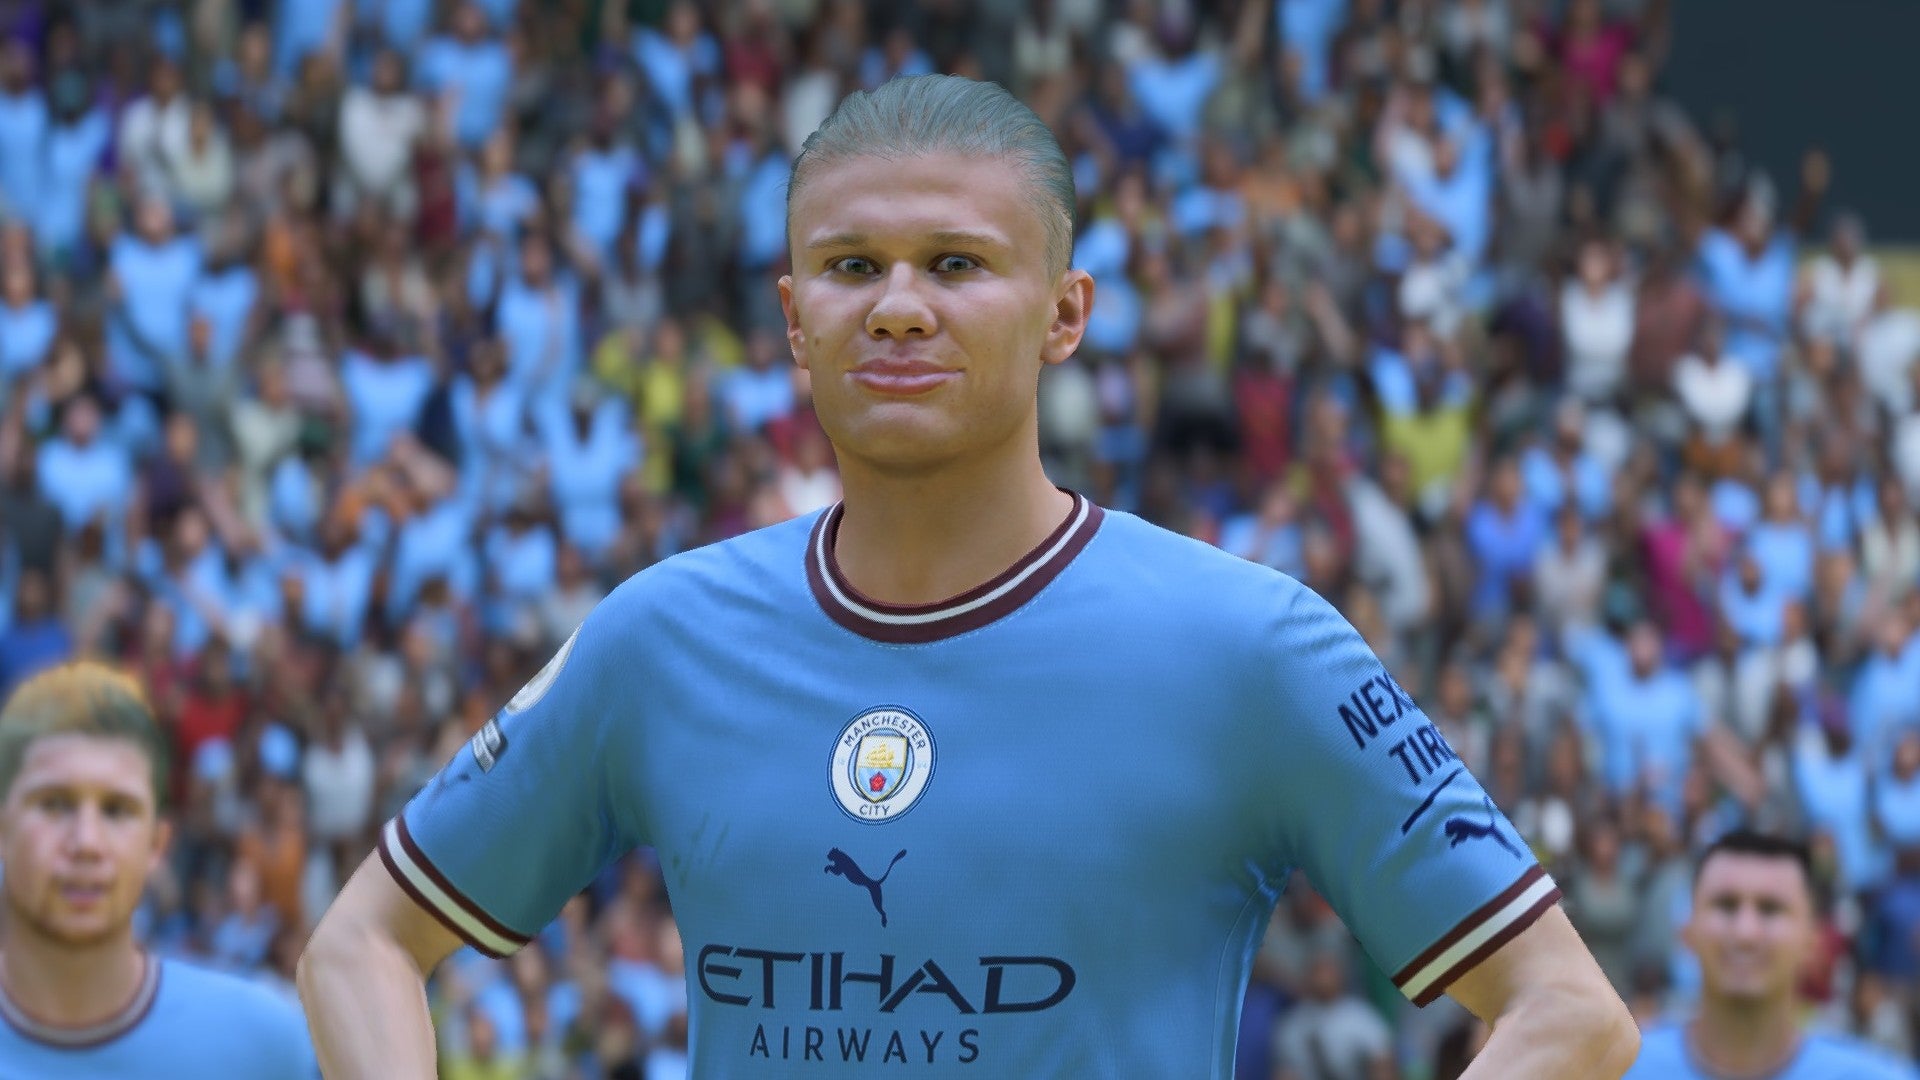 FIFA 23 screenshot showing Erling Haaland staring at the camera with his hands on his hips wearing a Man City kit, with a crowd of fans behind him.